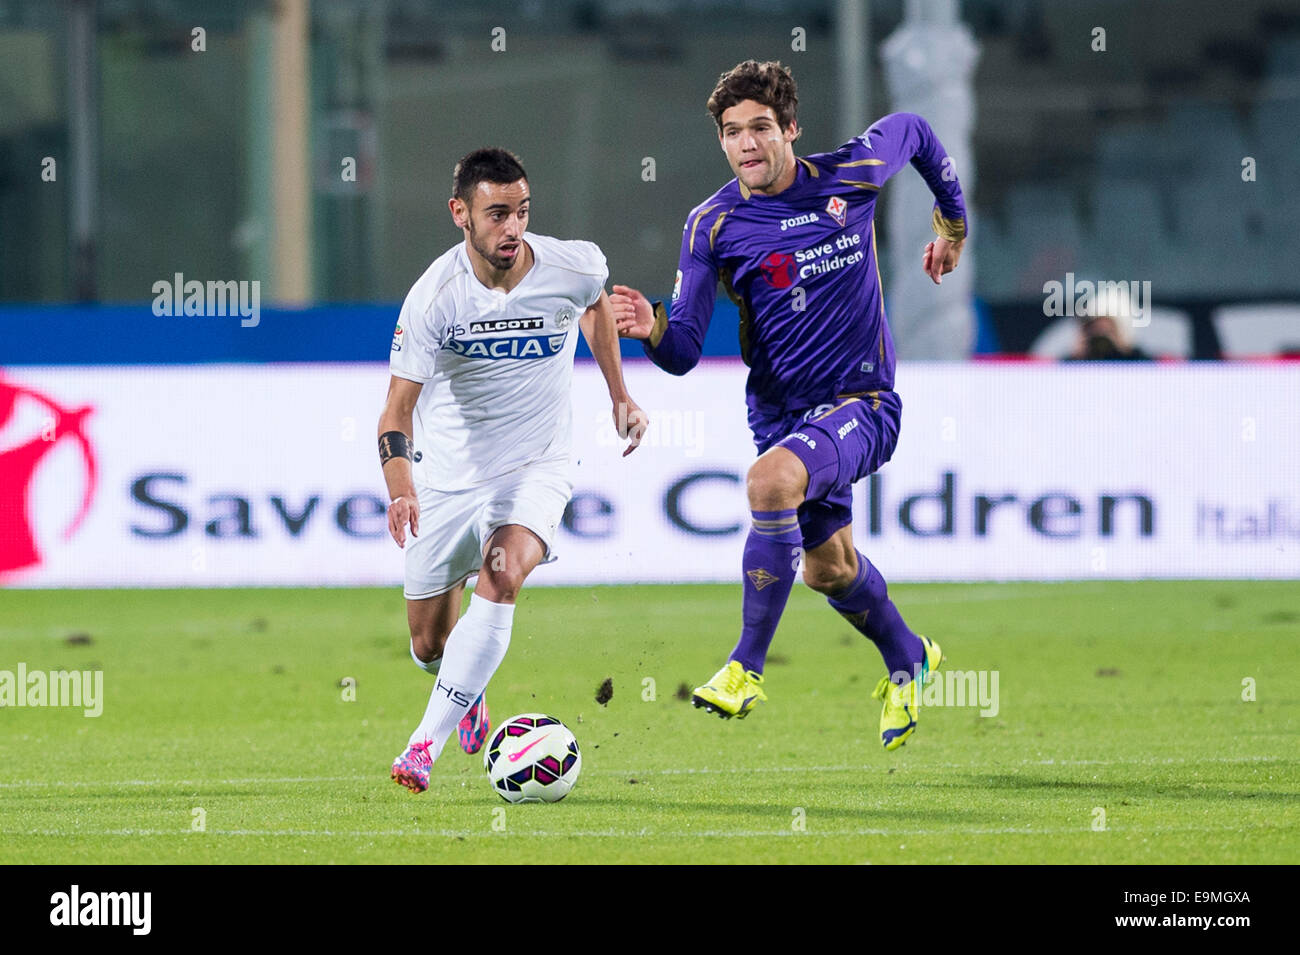 Firenze, Italy. 29th Oct, 2014. Bruno Fernandes (Udinese), Marcos Alonso  Mendoza (Fiorentina) Football/Soccer : Italian "Serie A" match between  Fiorentina 3-0 Udinese at Artemio Franchi Stadium in Firenze, Italy .  Credit: Maurizio